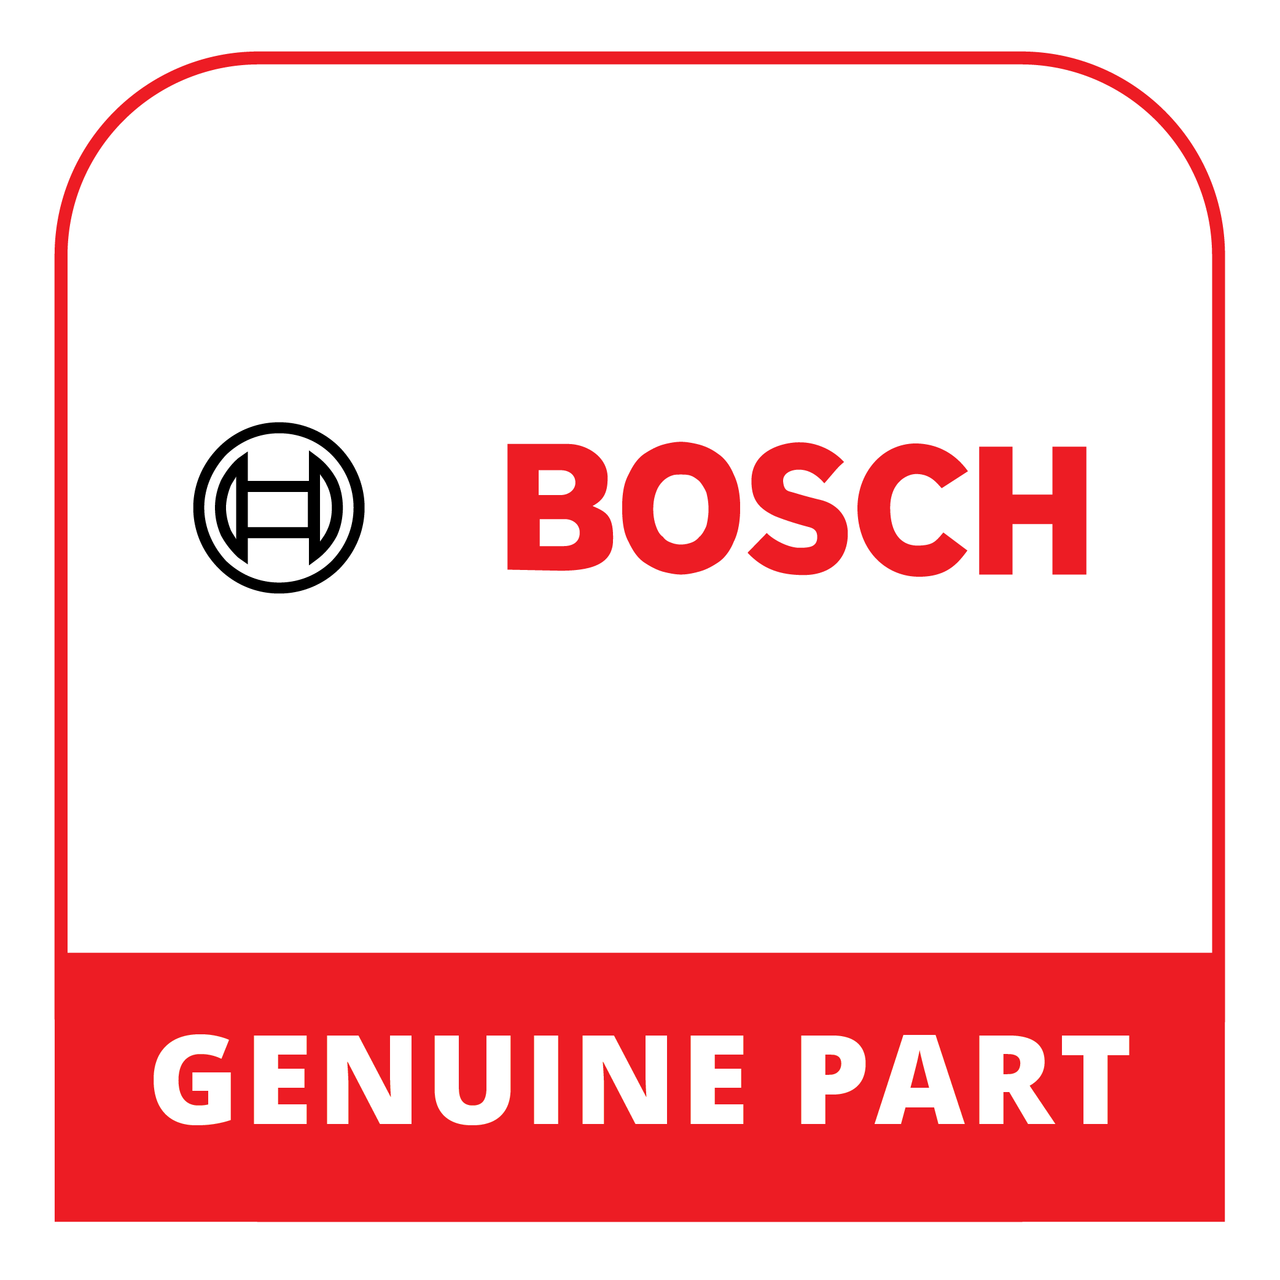 Bosch 00798775 - Dividing Wall - Genuine Bosch (Thermador) Part